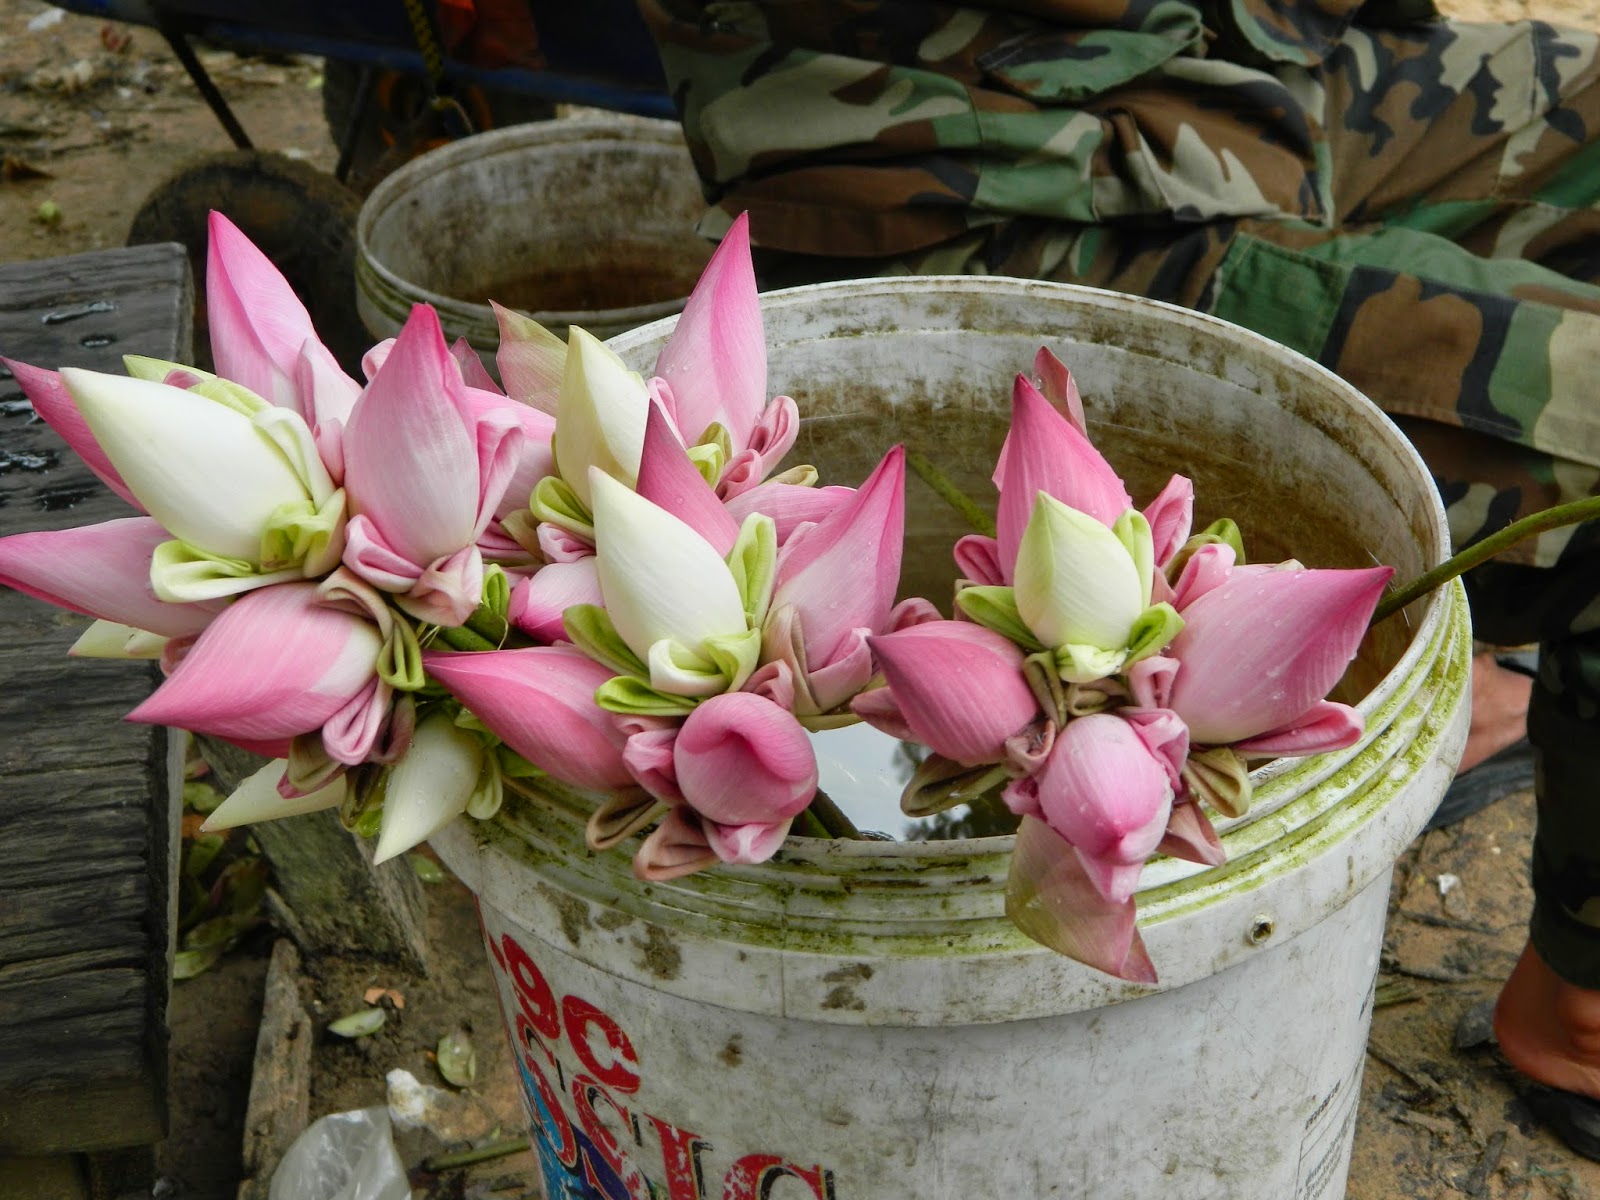 There is lotus all around in Cambodia. I am moving here. 